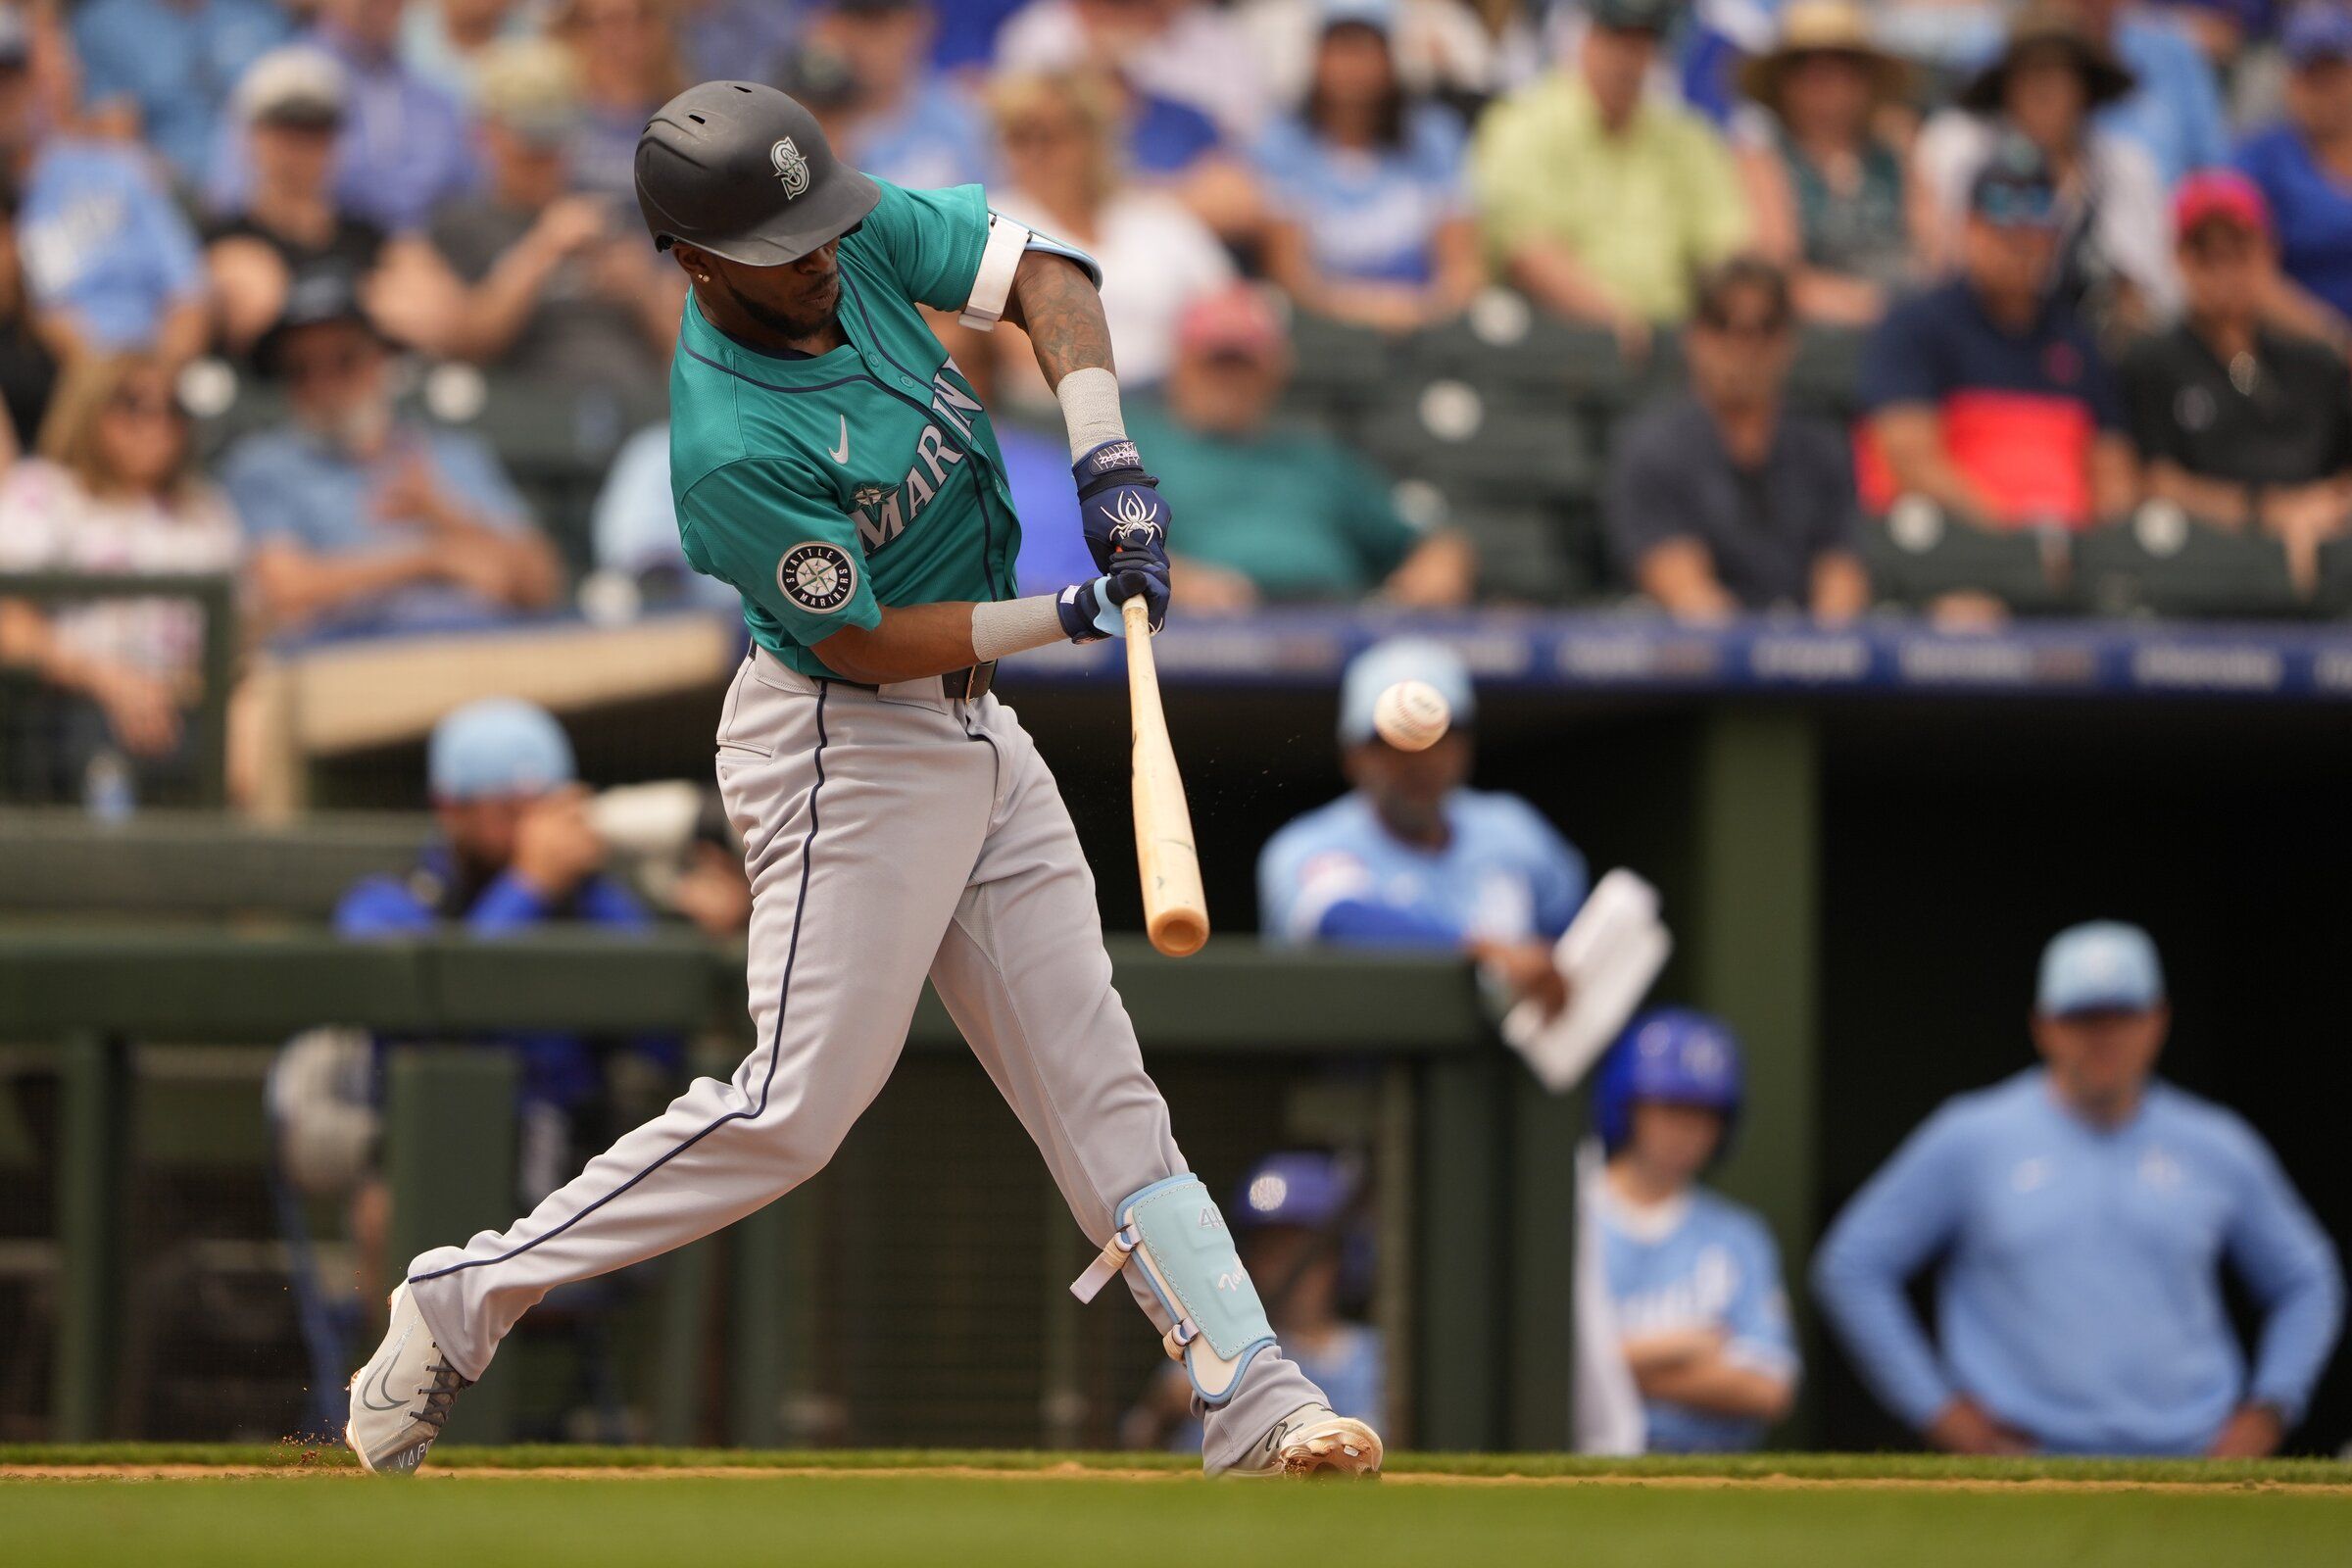 Mariners pick up second Cactus League win, beating Royals | The